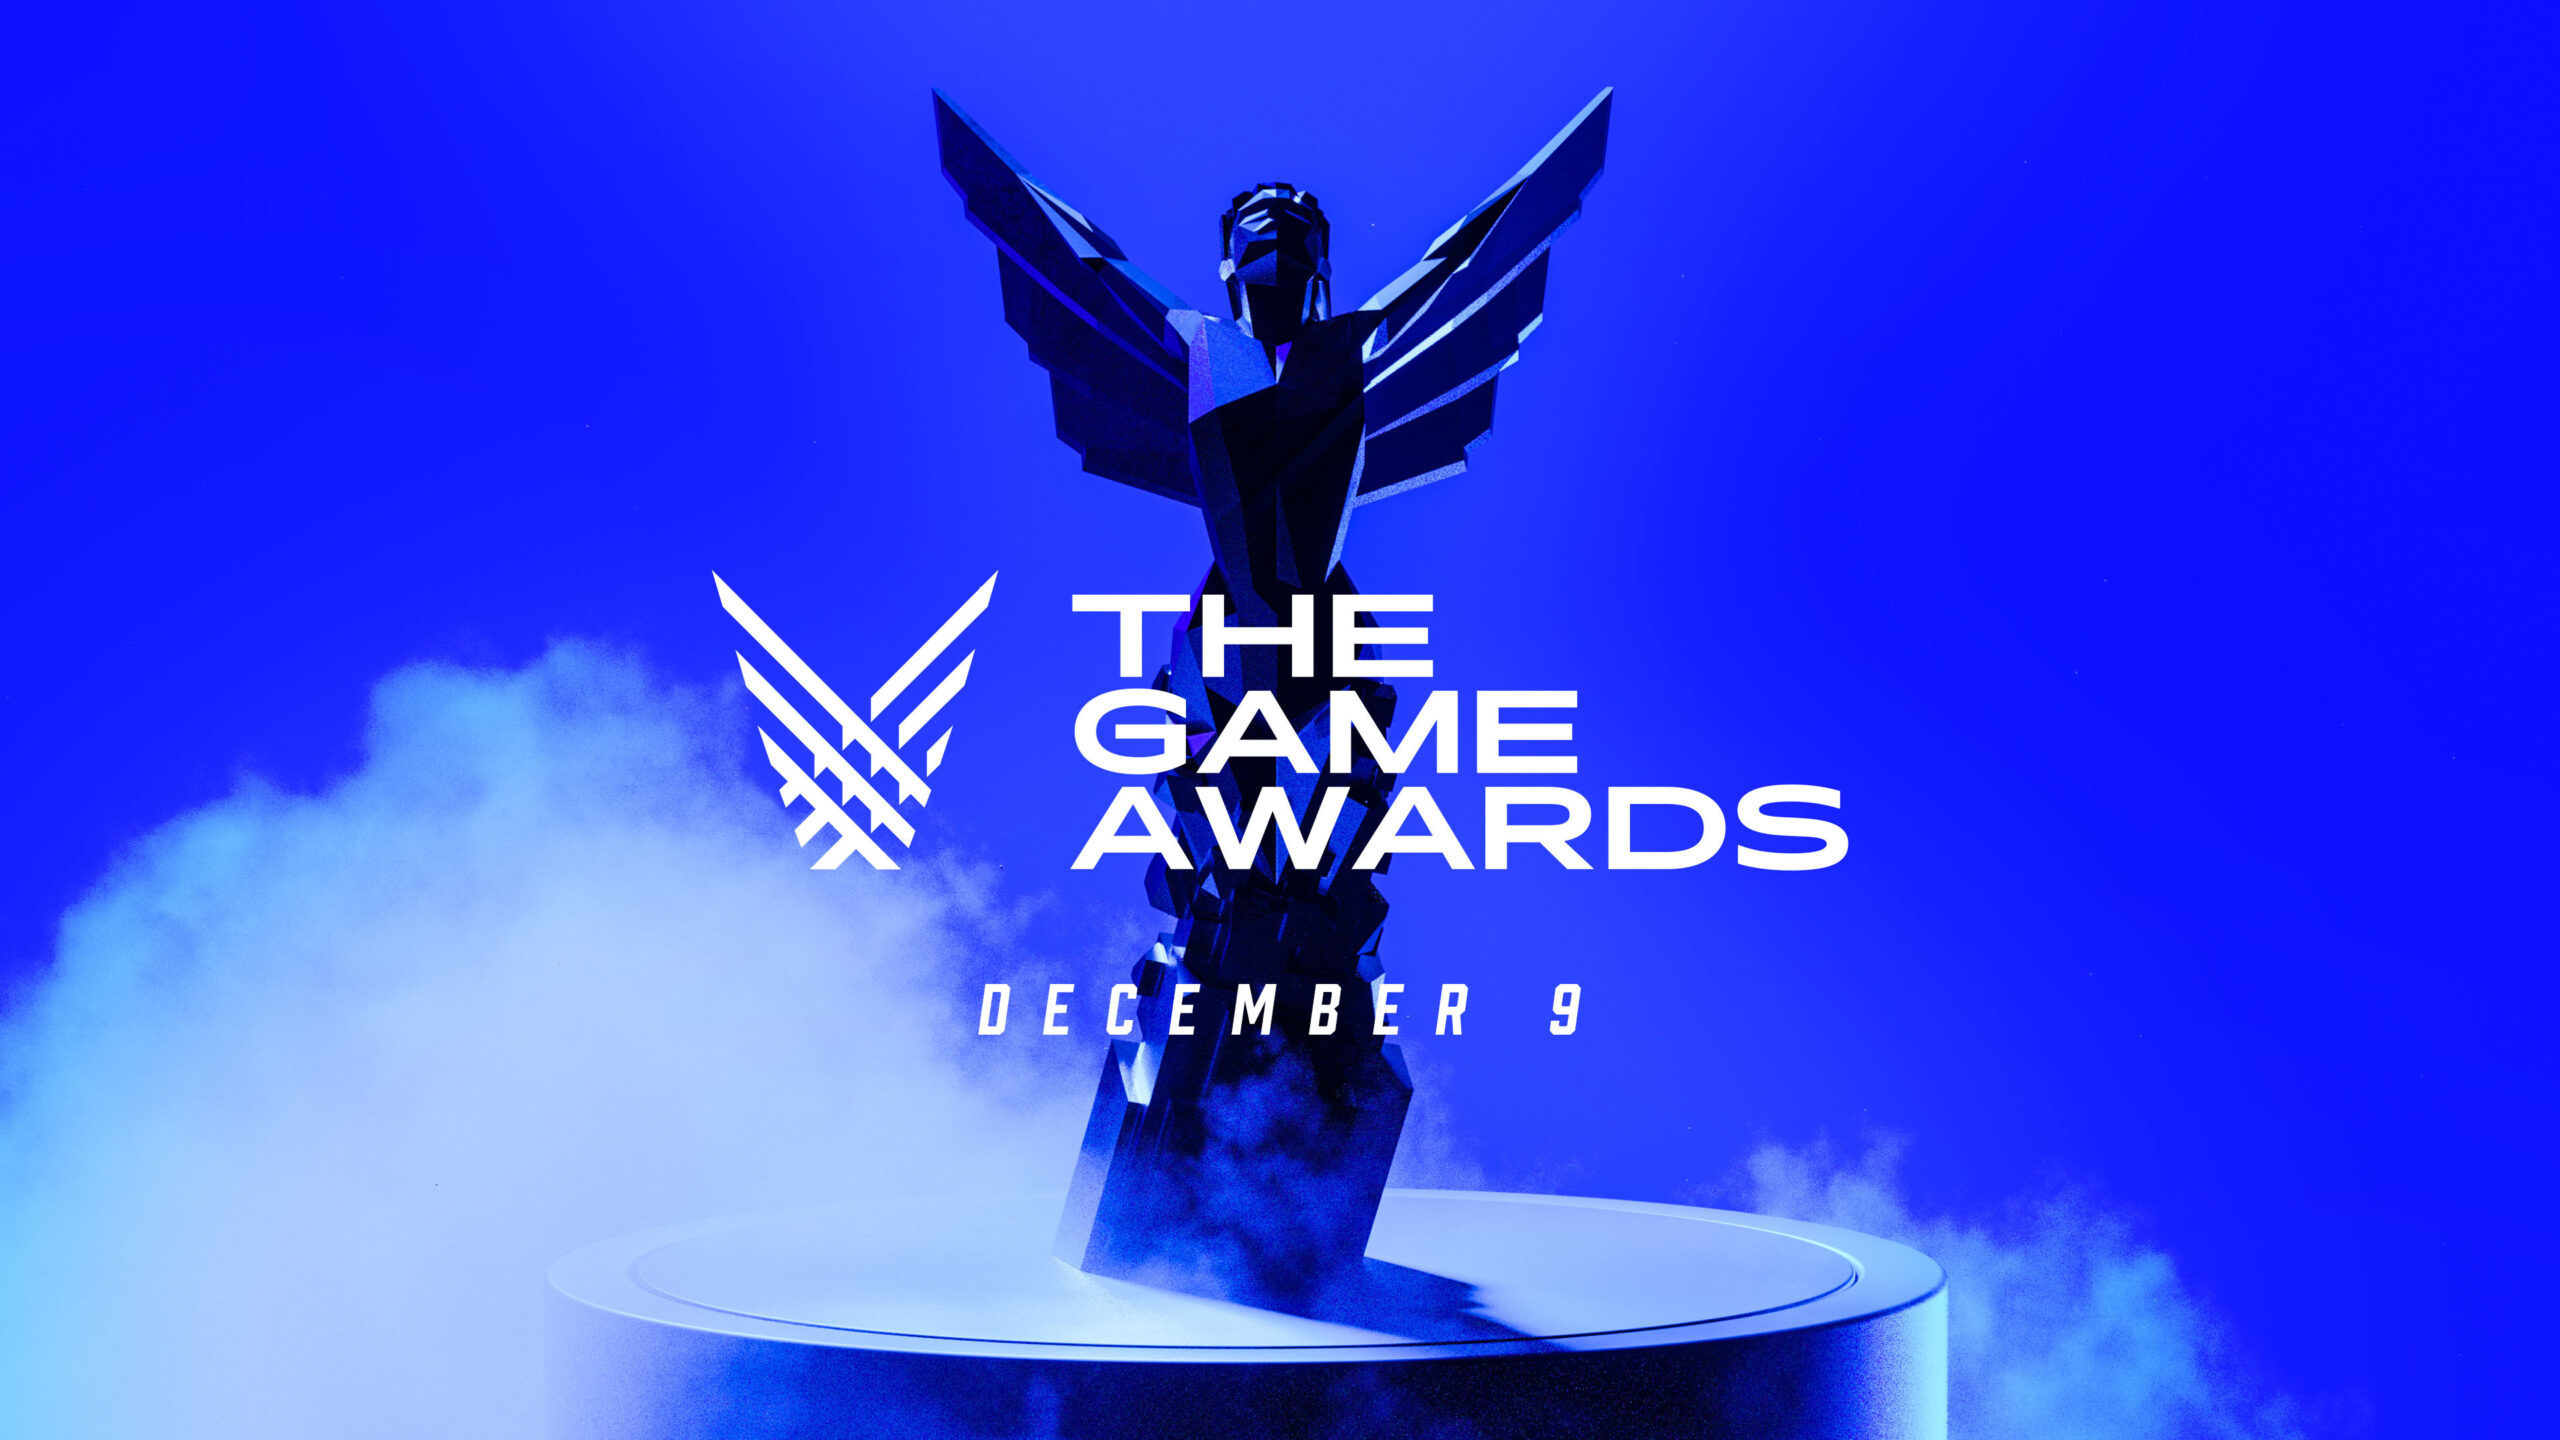 Here Are All The Nominated Games For The Game Awards